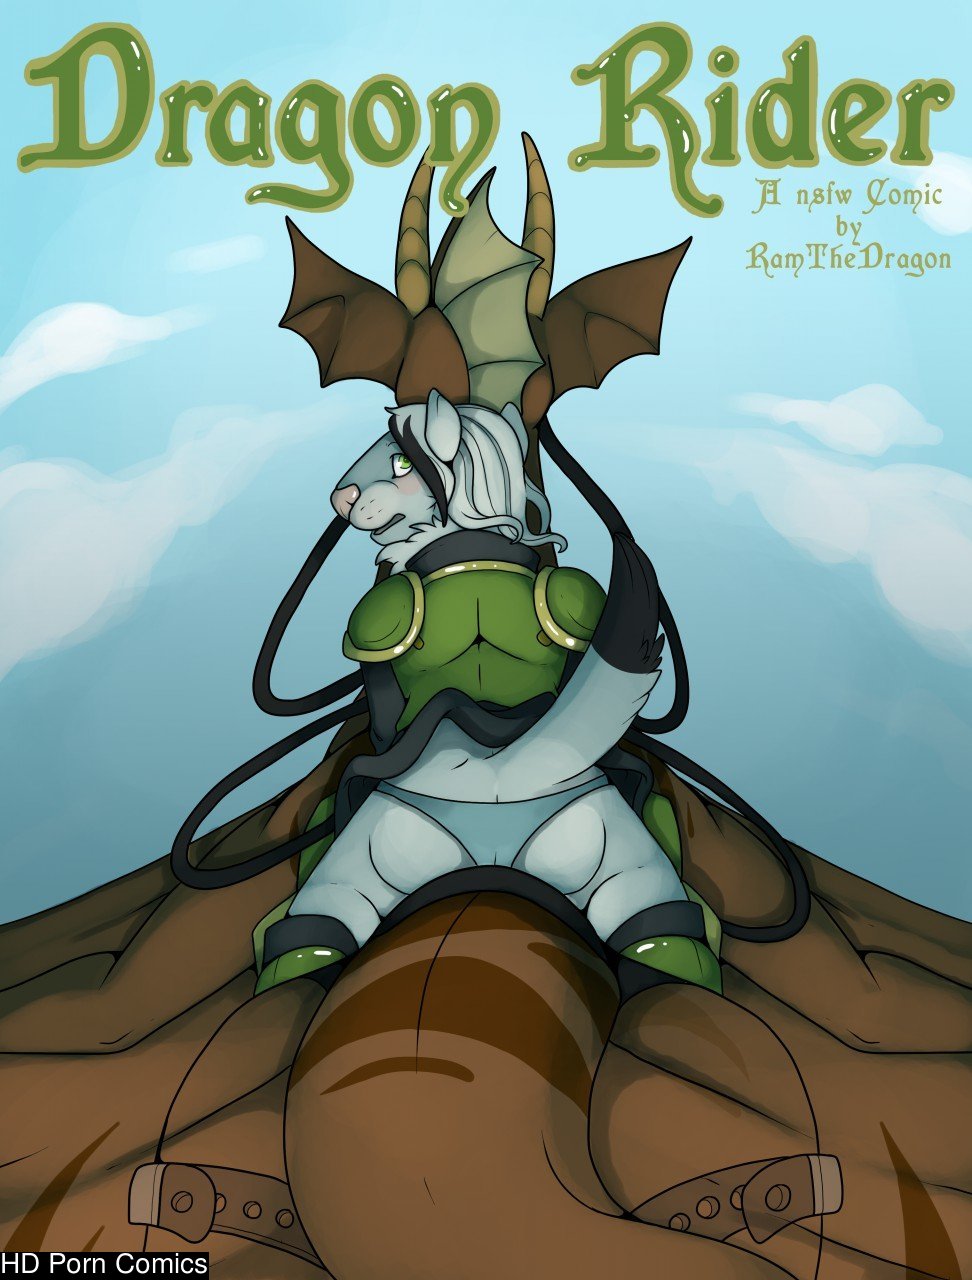 Ram The Dragon - dragon rider cought in the act comic porn - HD Porn Comics